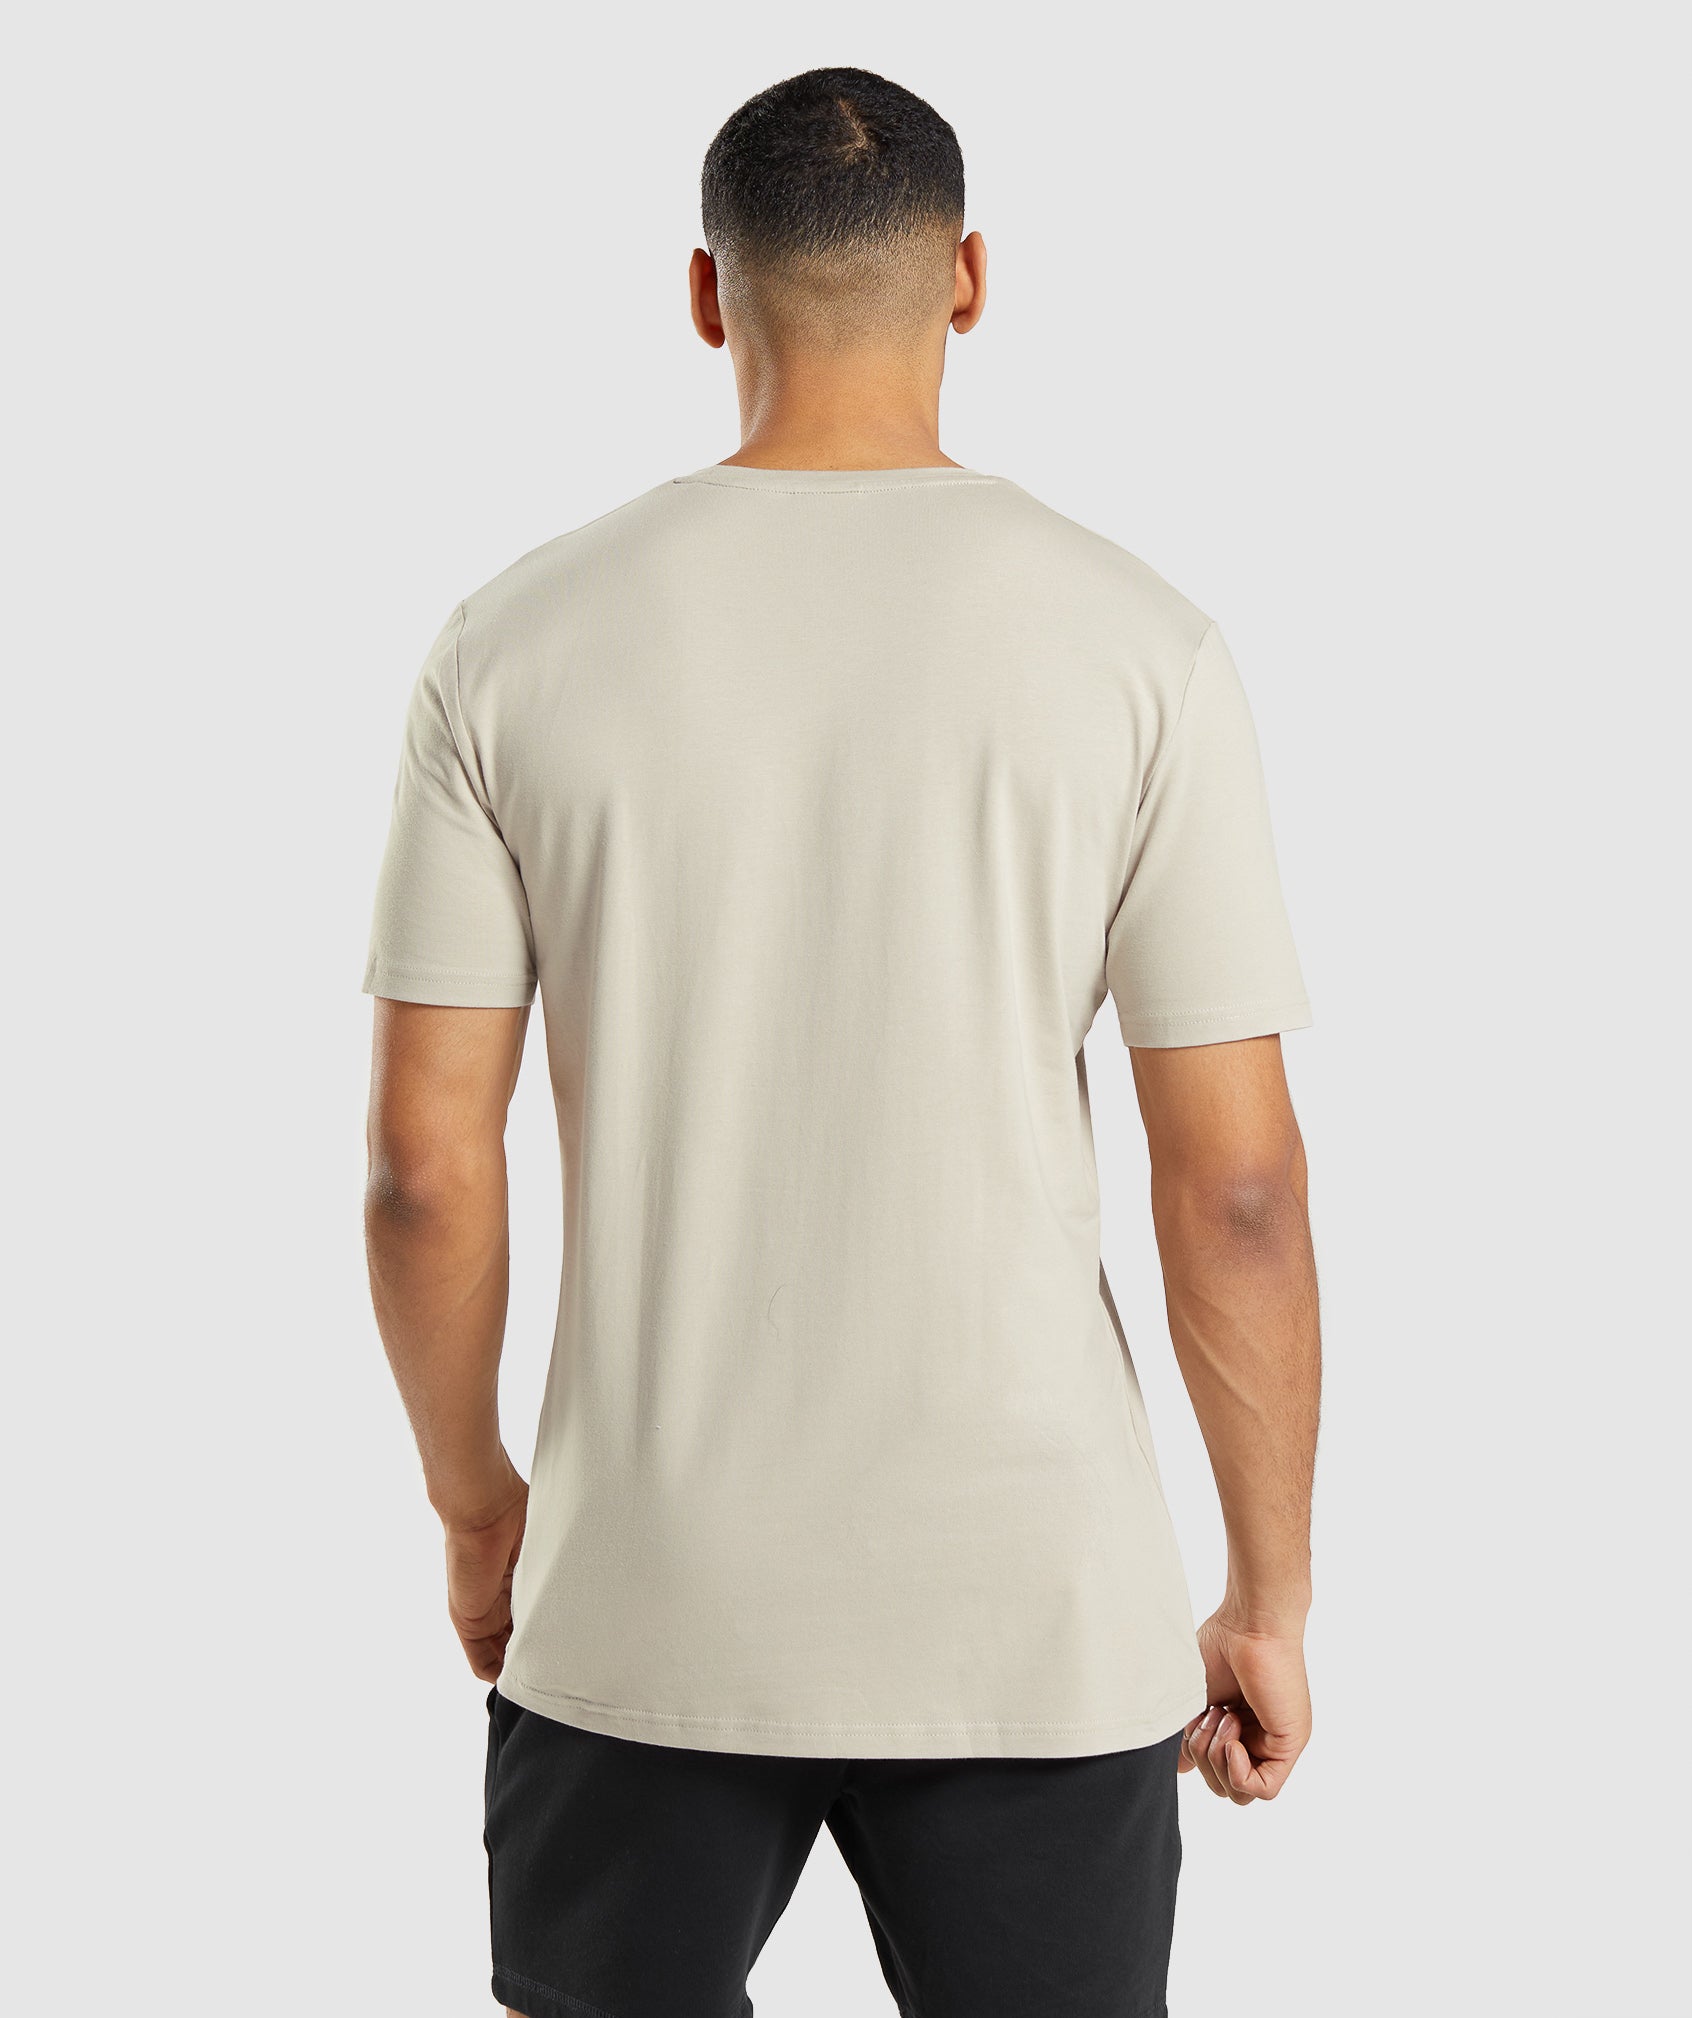 Essential T-Shirt in Pebble Grey - view 2